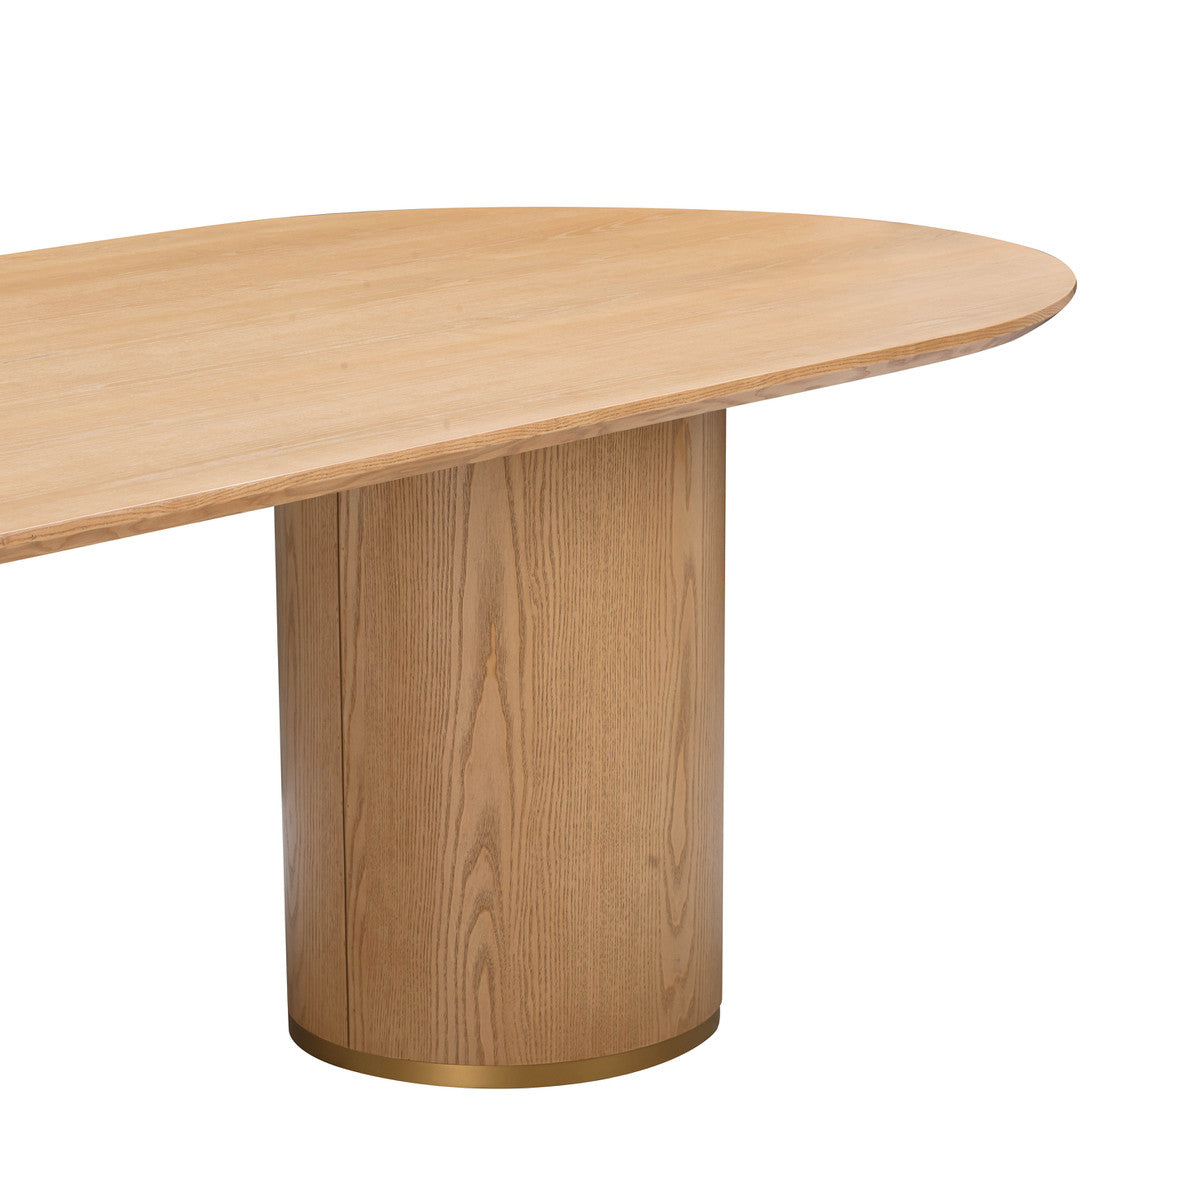 Bartolo Natural Ash Wood Oval Dining Table - Luxury Living Collection